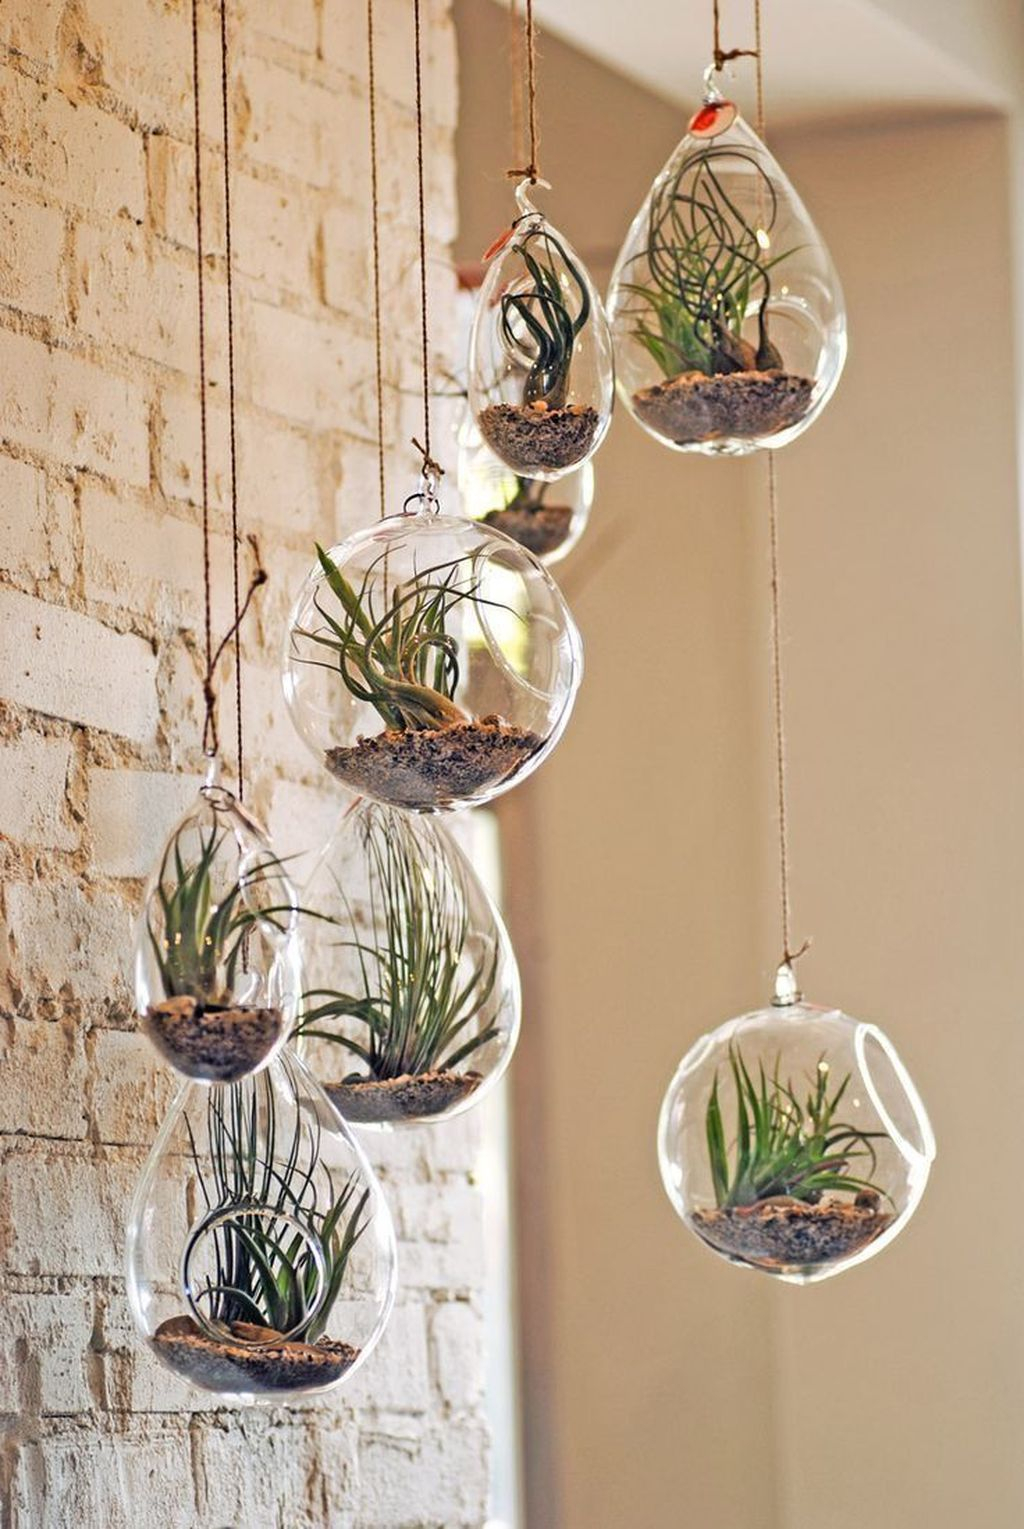 Awesome Indoor Plant Decoration Ideas To Make Natural Comfort In Your Home39